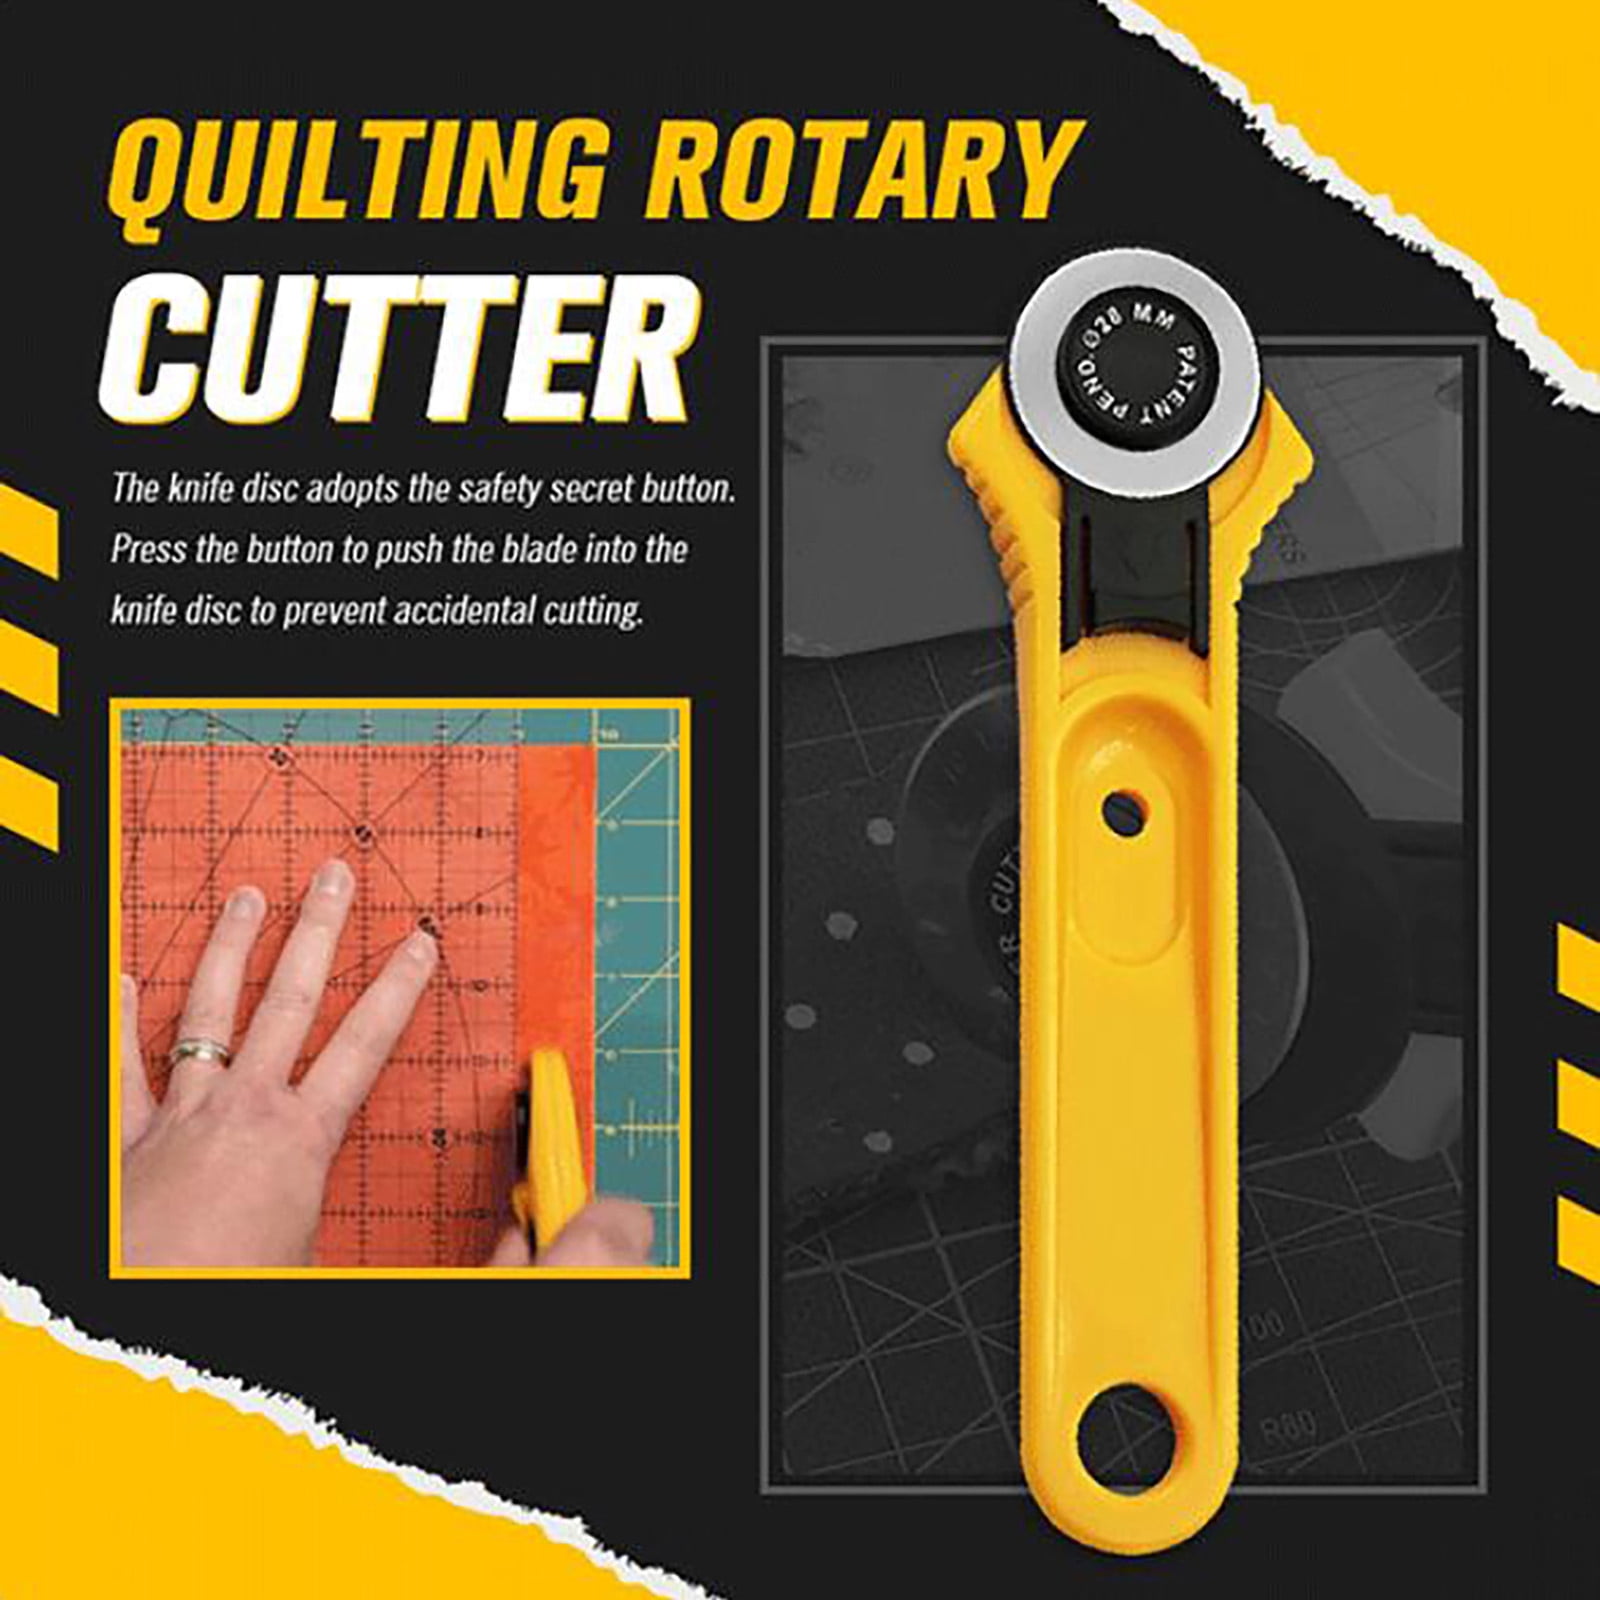 Gerich 45mm Round Wheel Rotary Cutter Quilting Sewing Roller Fabric Cutting  Tools Orange 